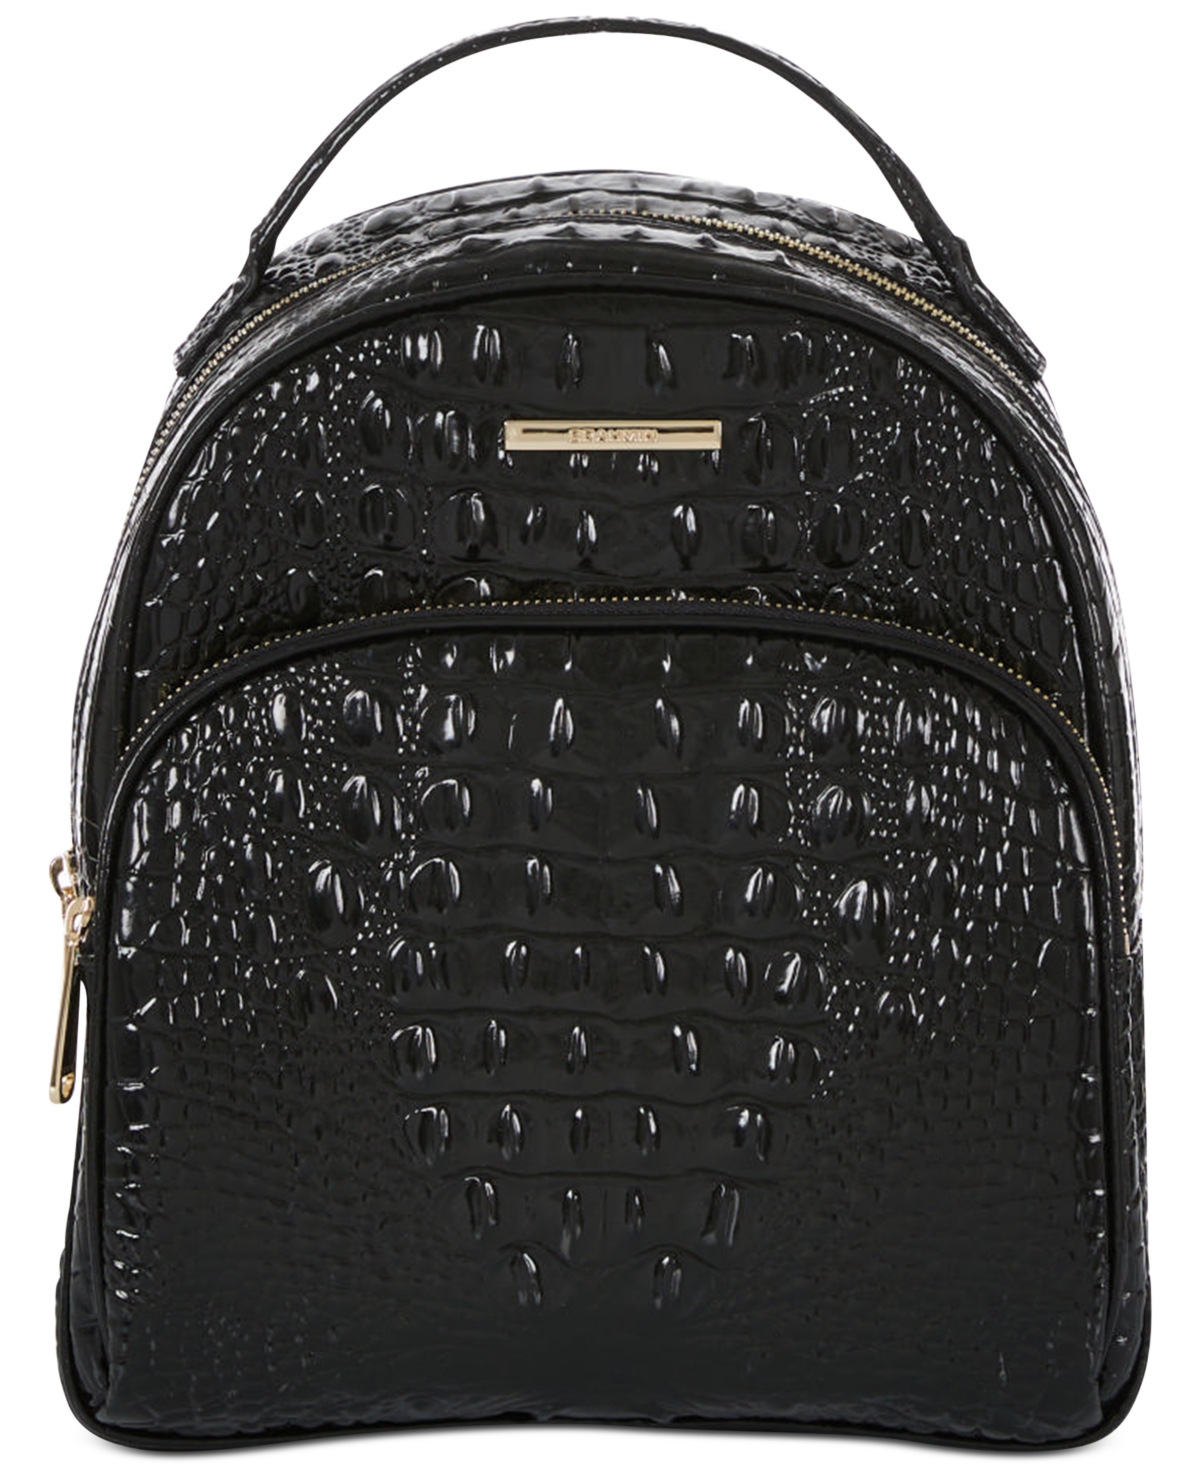 BRAHMIN CHELCY MELBOURNE EMBOSSED LEATHER BACKPACK